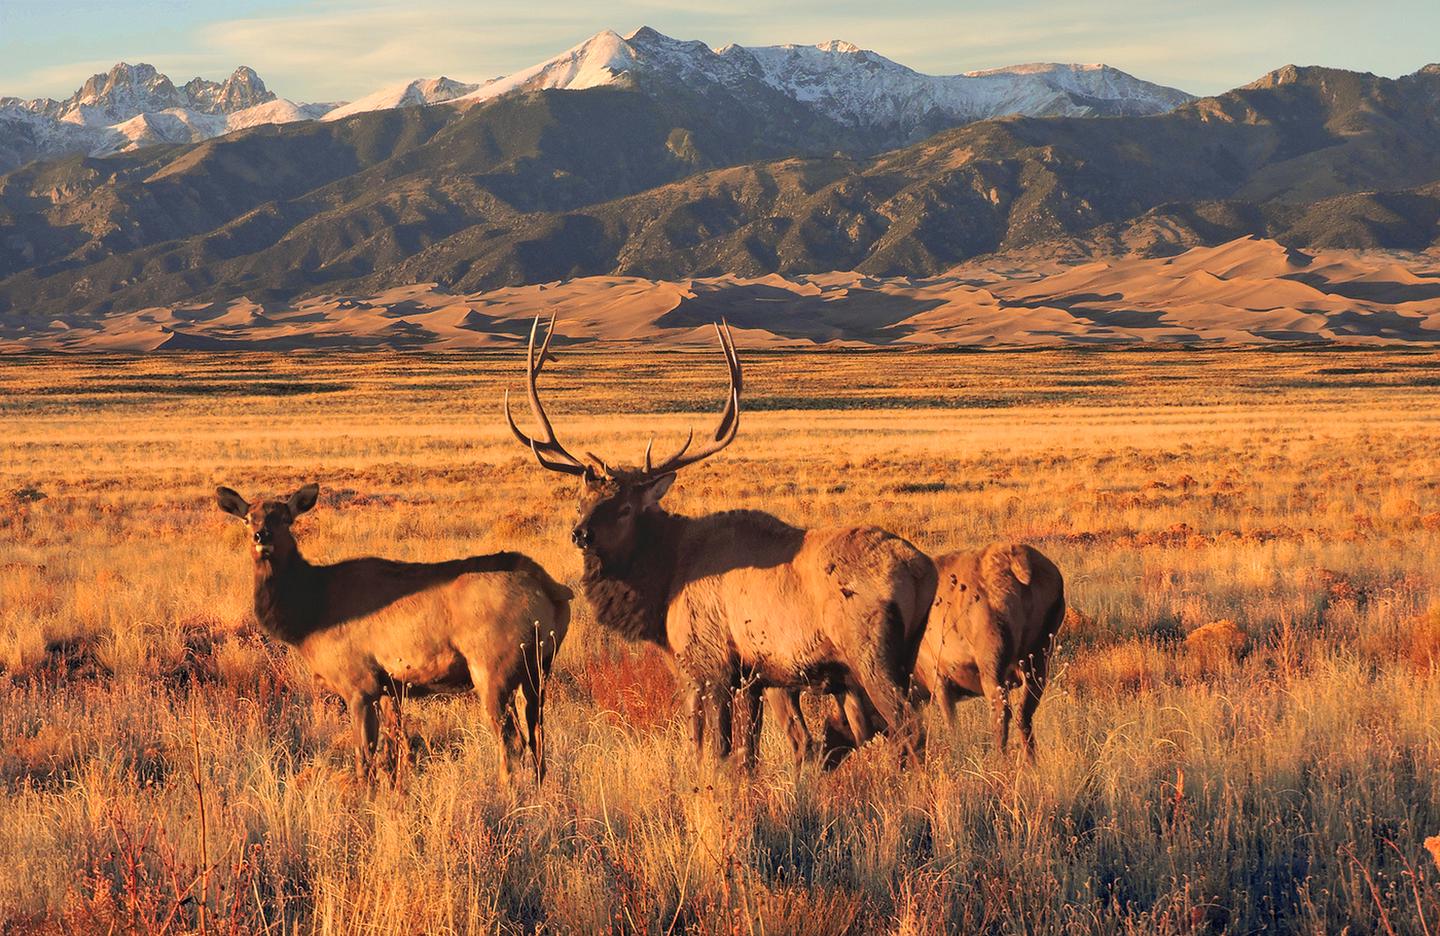 Elk, Grasslands, Dunes, and Sangre de Cristo MountainsElk are sometimes seen by visitors along the park entrance road or County Lane 6, primarily fall through spring.